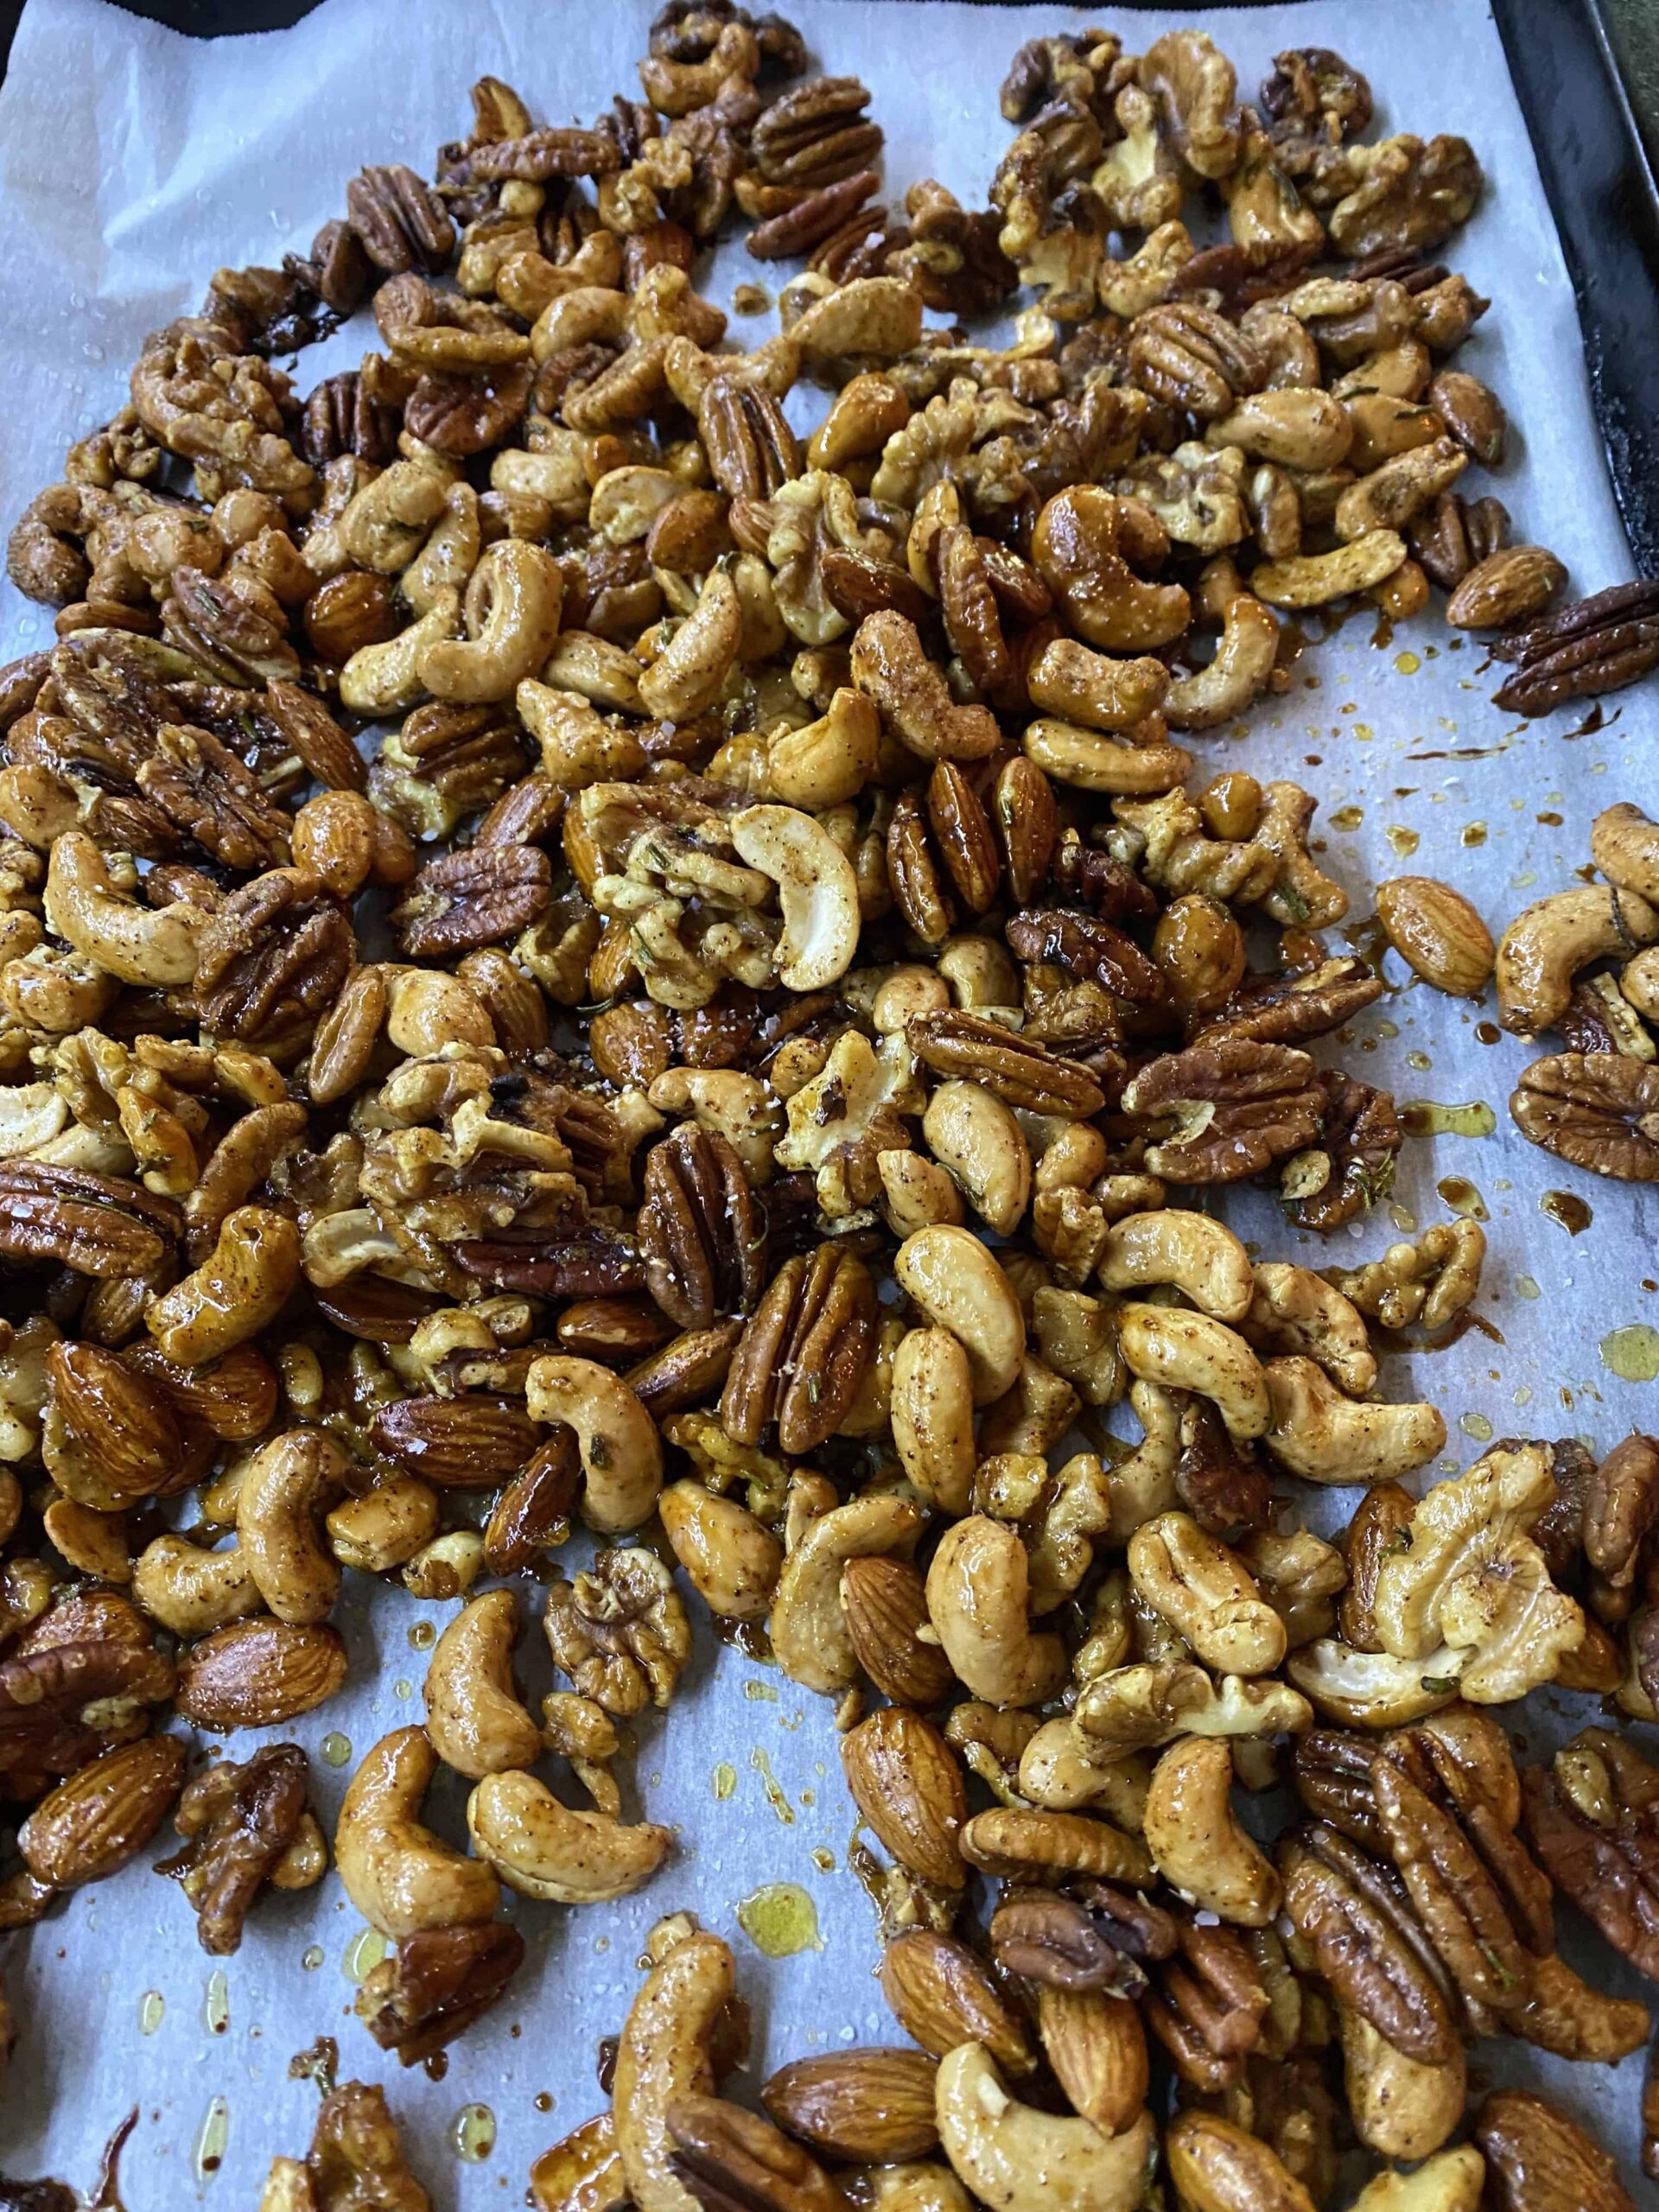 Chipotle & Rosemary Roasted Nuts